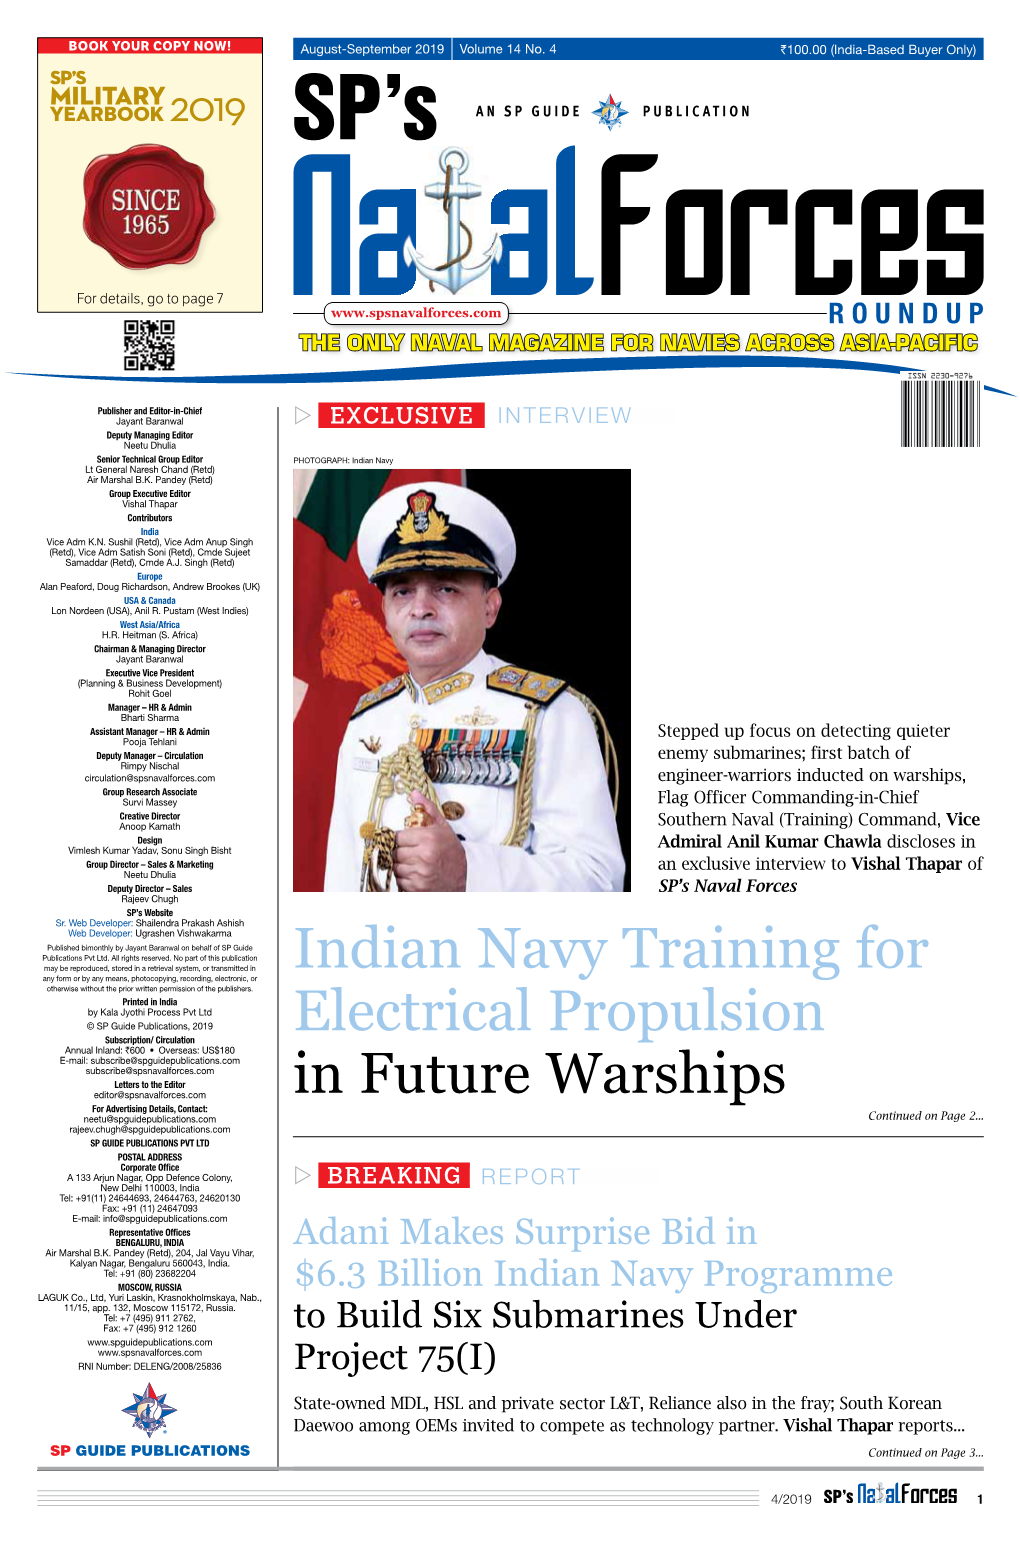 Indian Navy Training for Electrical Propulsion in Future Warships